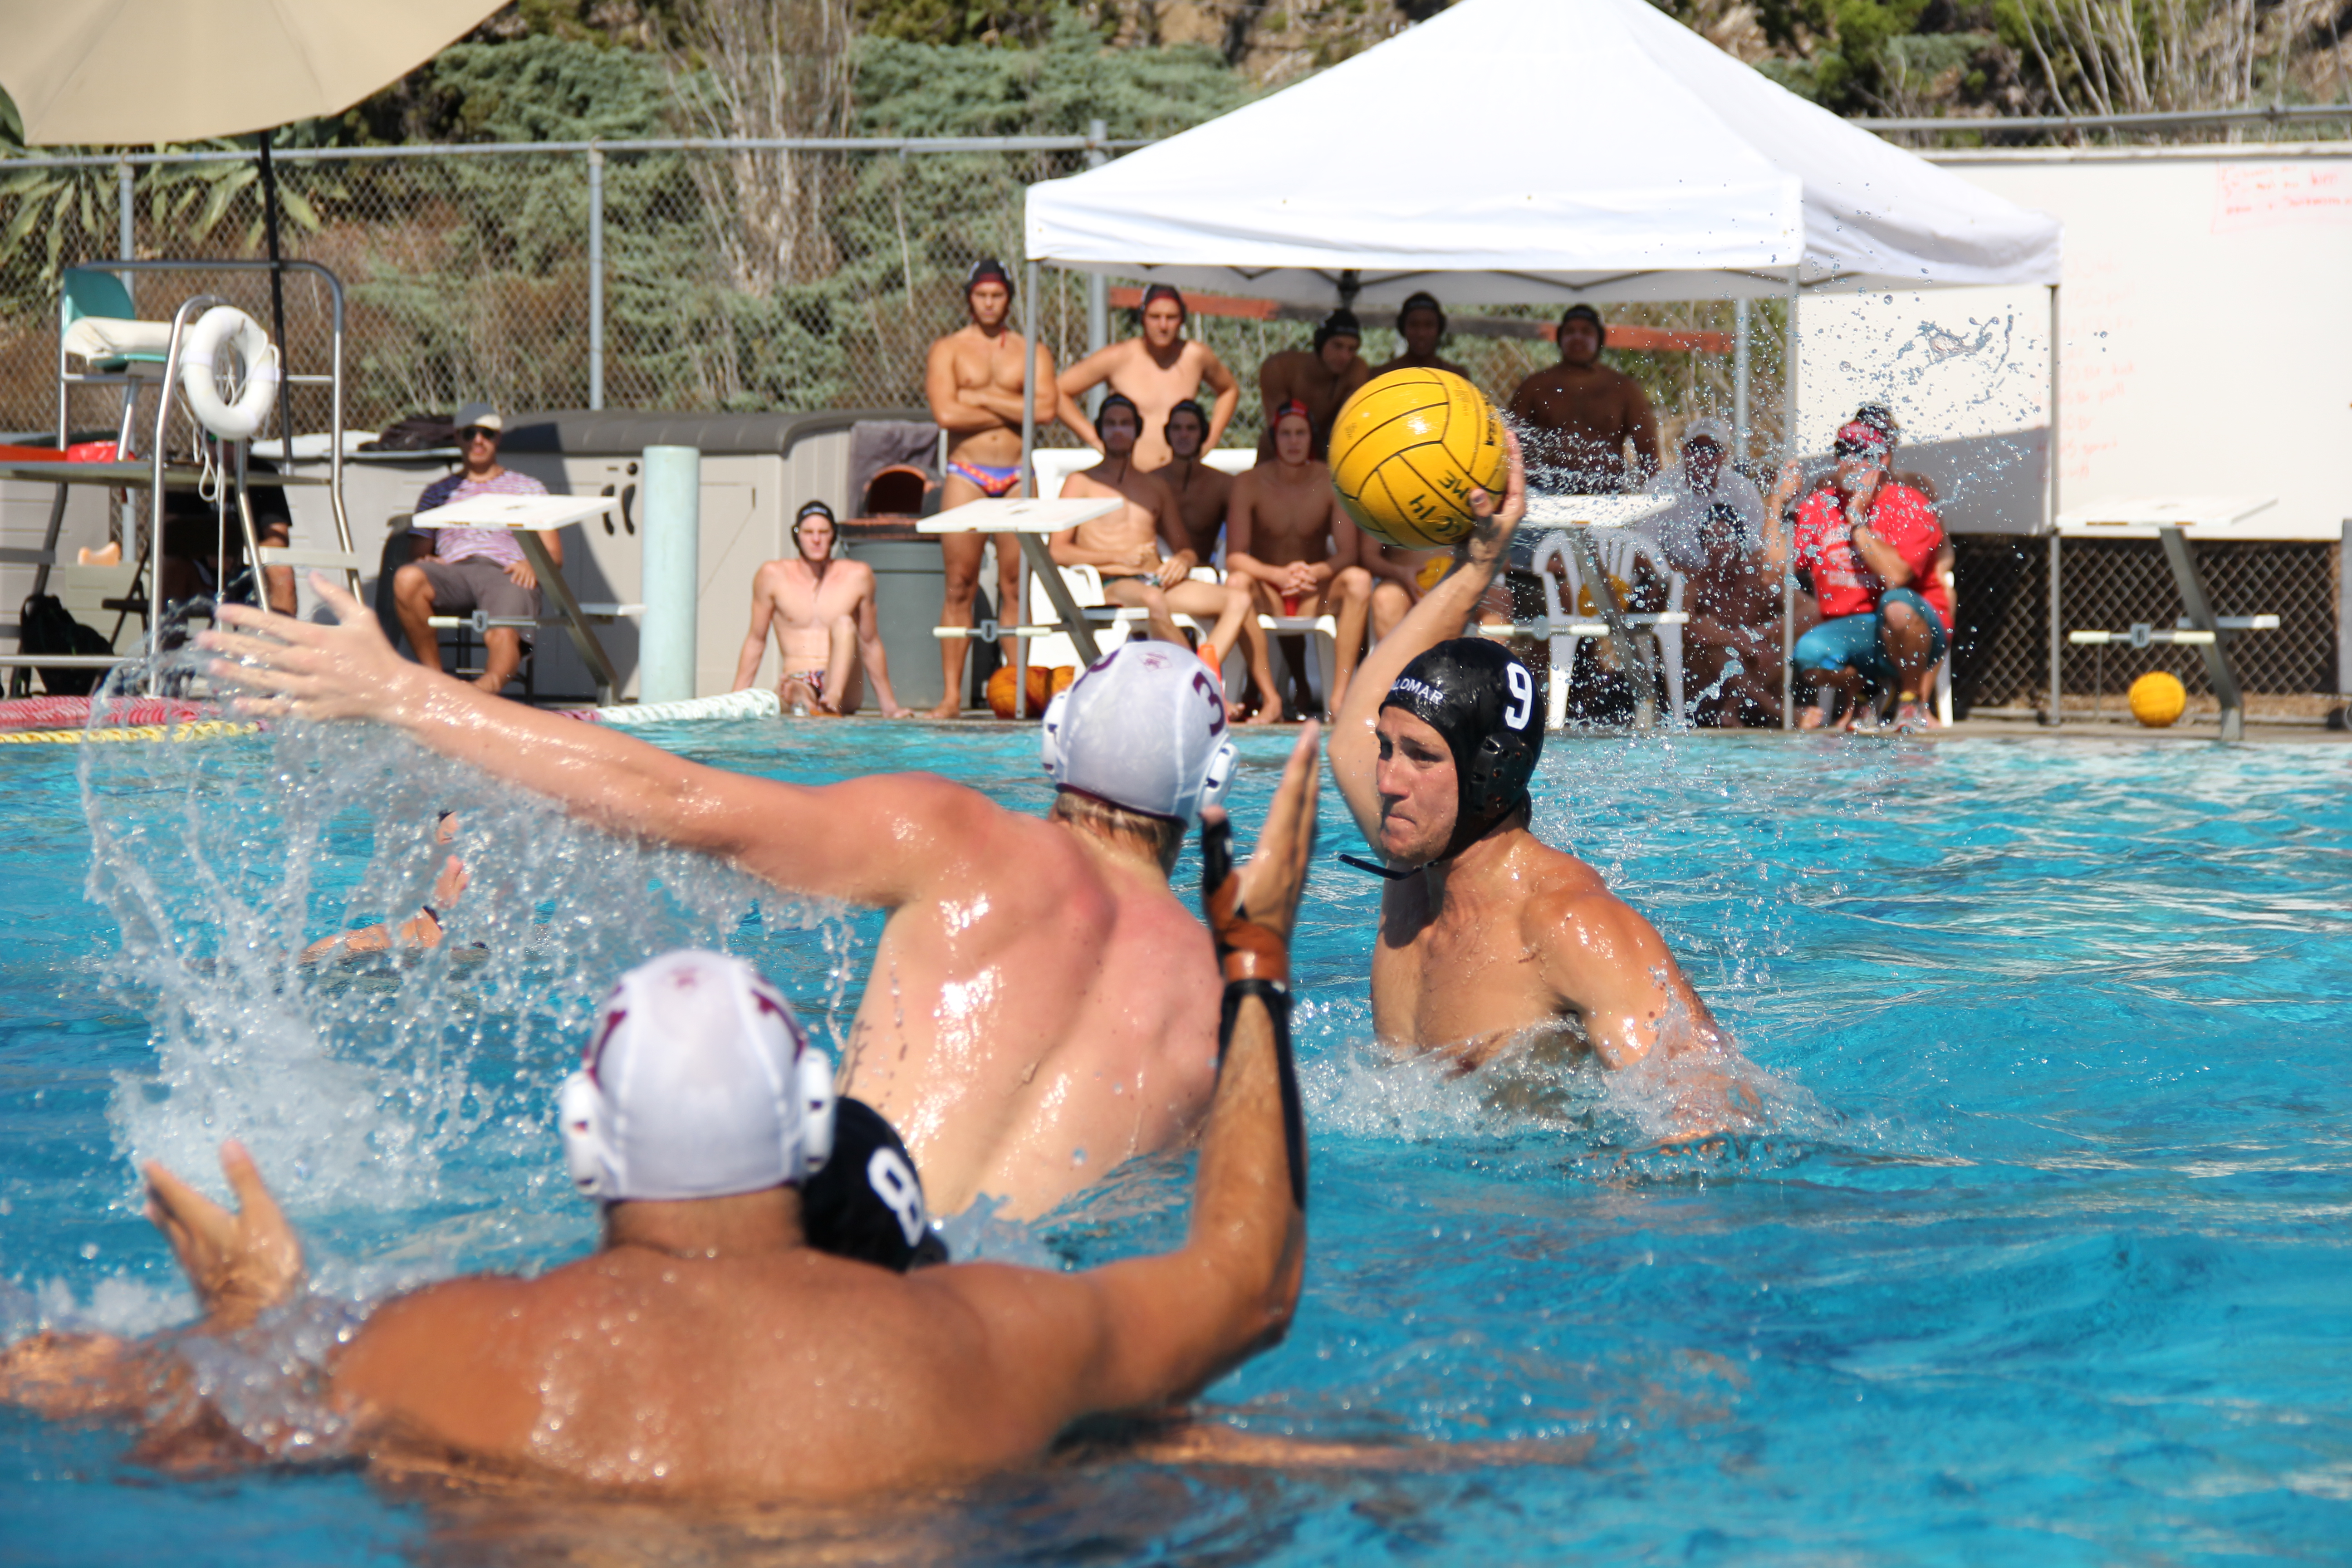 A male Palomar water polo player throws a ball as an opponent tries to block him.